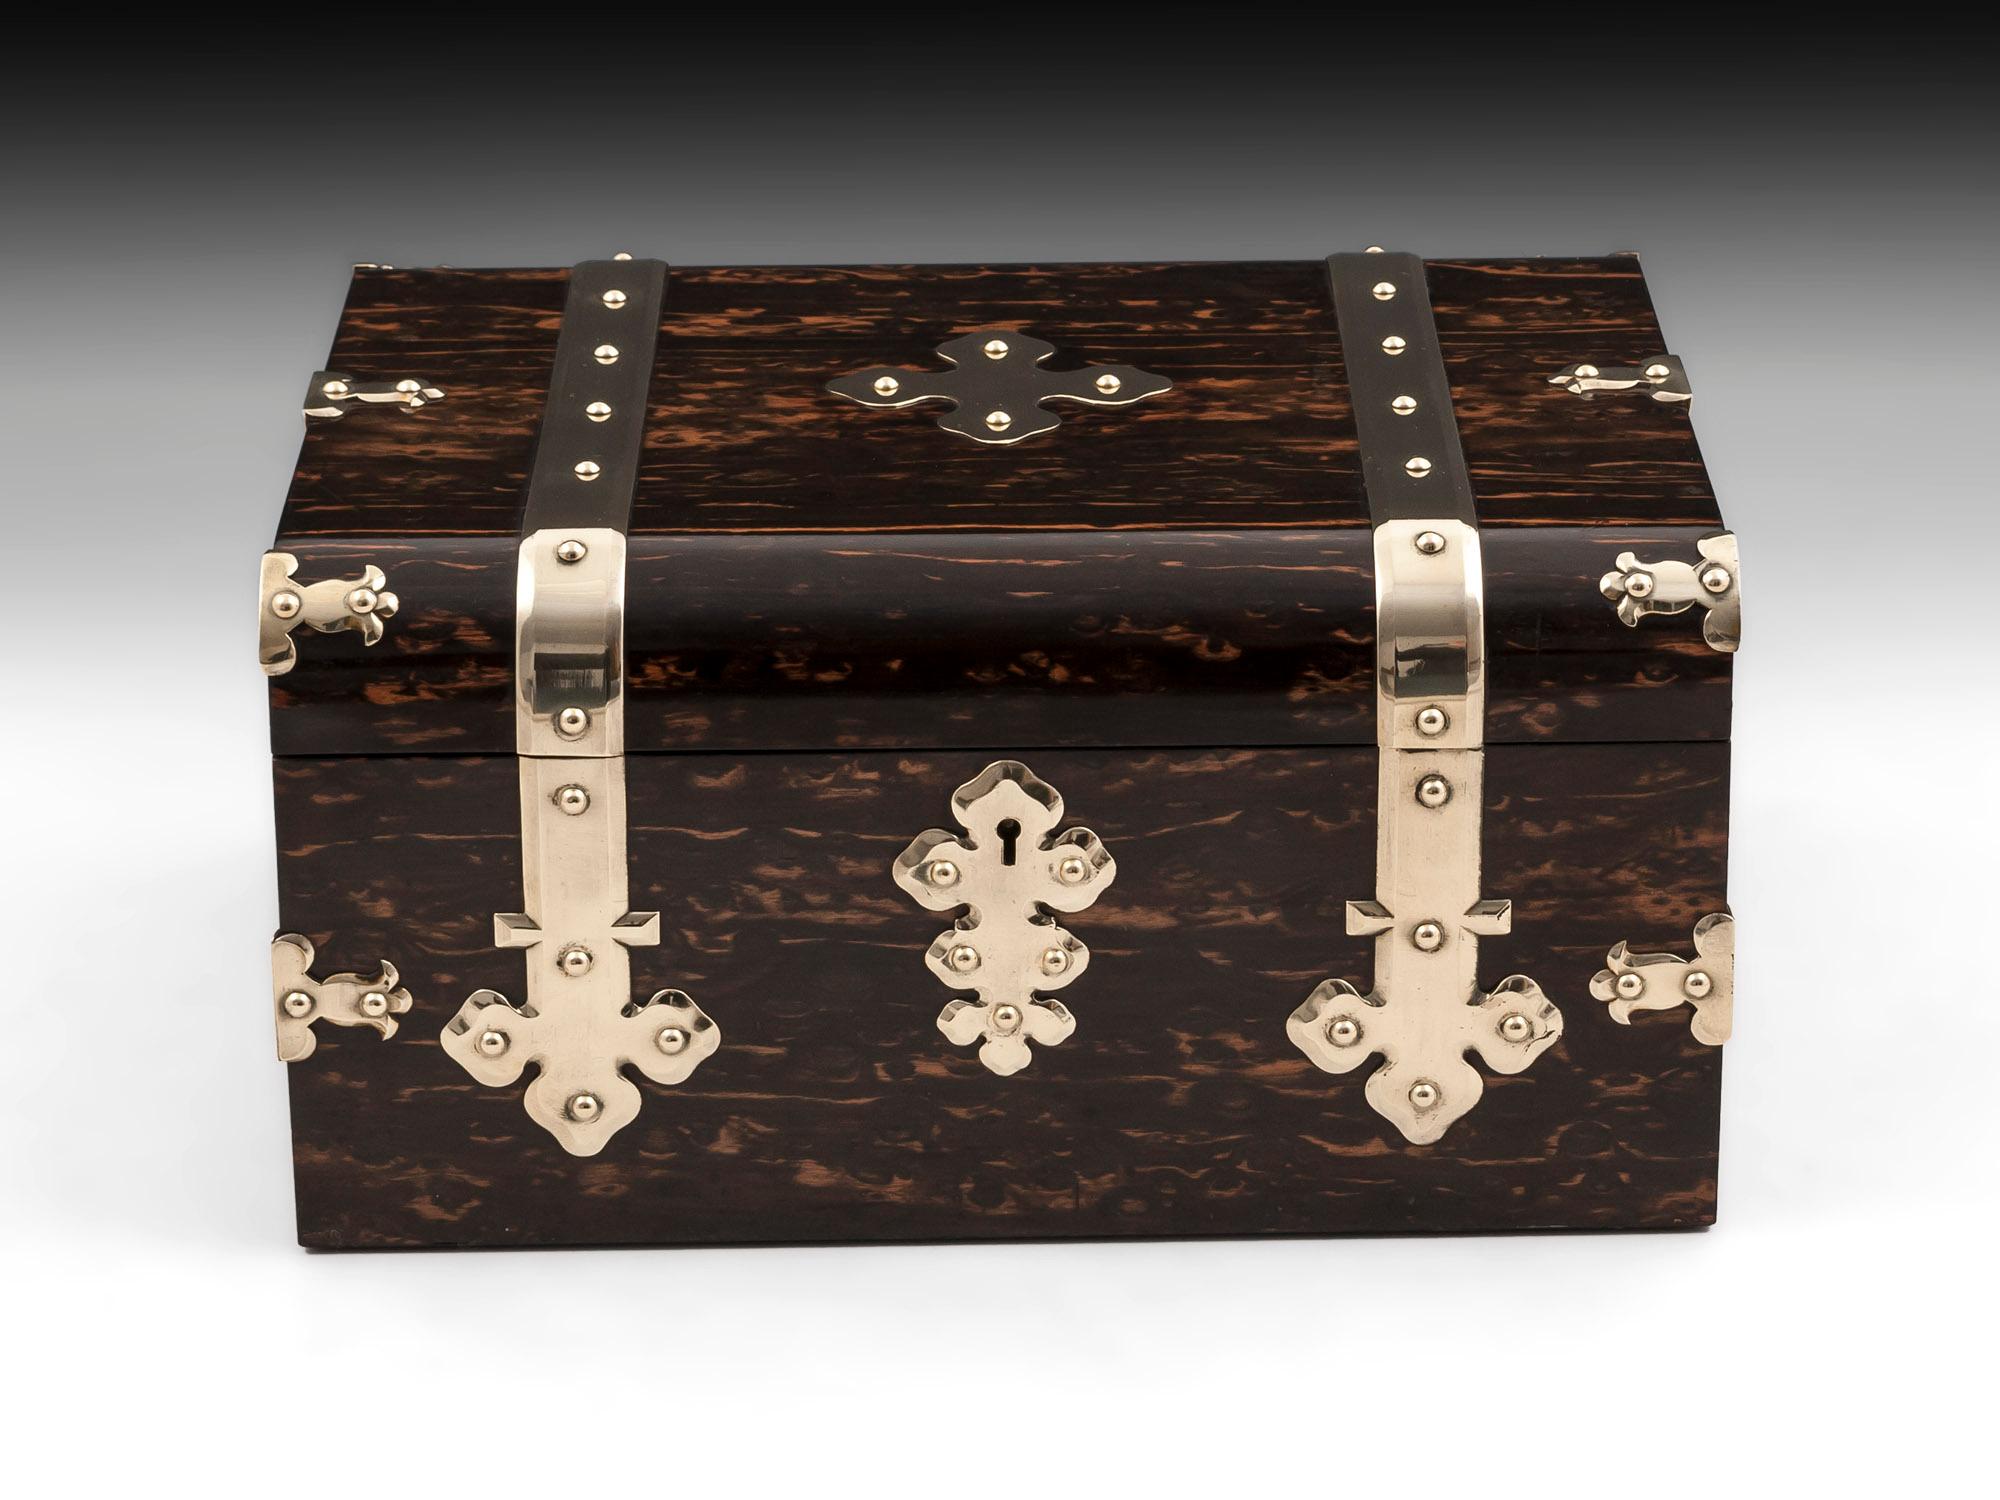 George Betjemann & Son Jewelry box veneered in sumptuous figured Coromandel with ornate applied brass straps running from front to back, with vacant brass initial plate, escutcheon and corner brackets for added strength. 

The interior of this